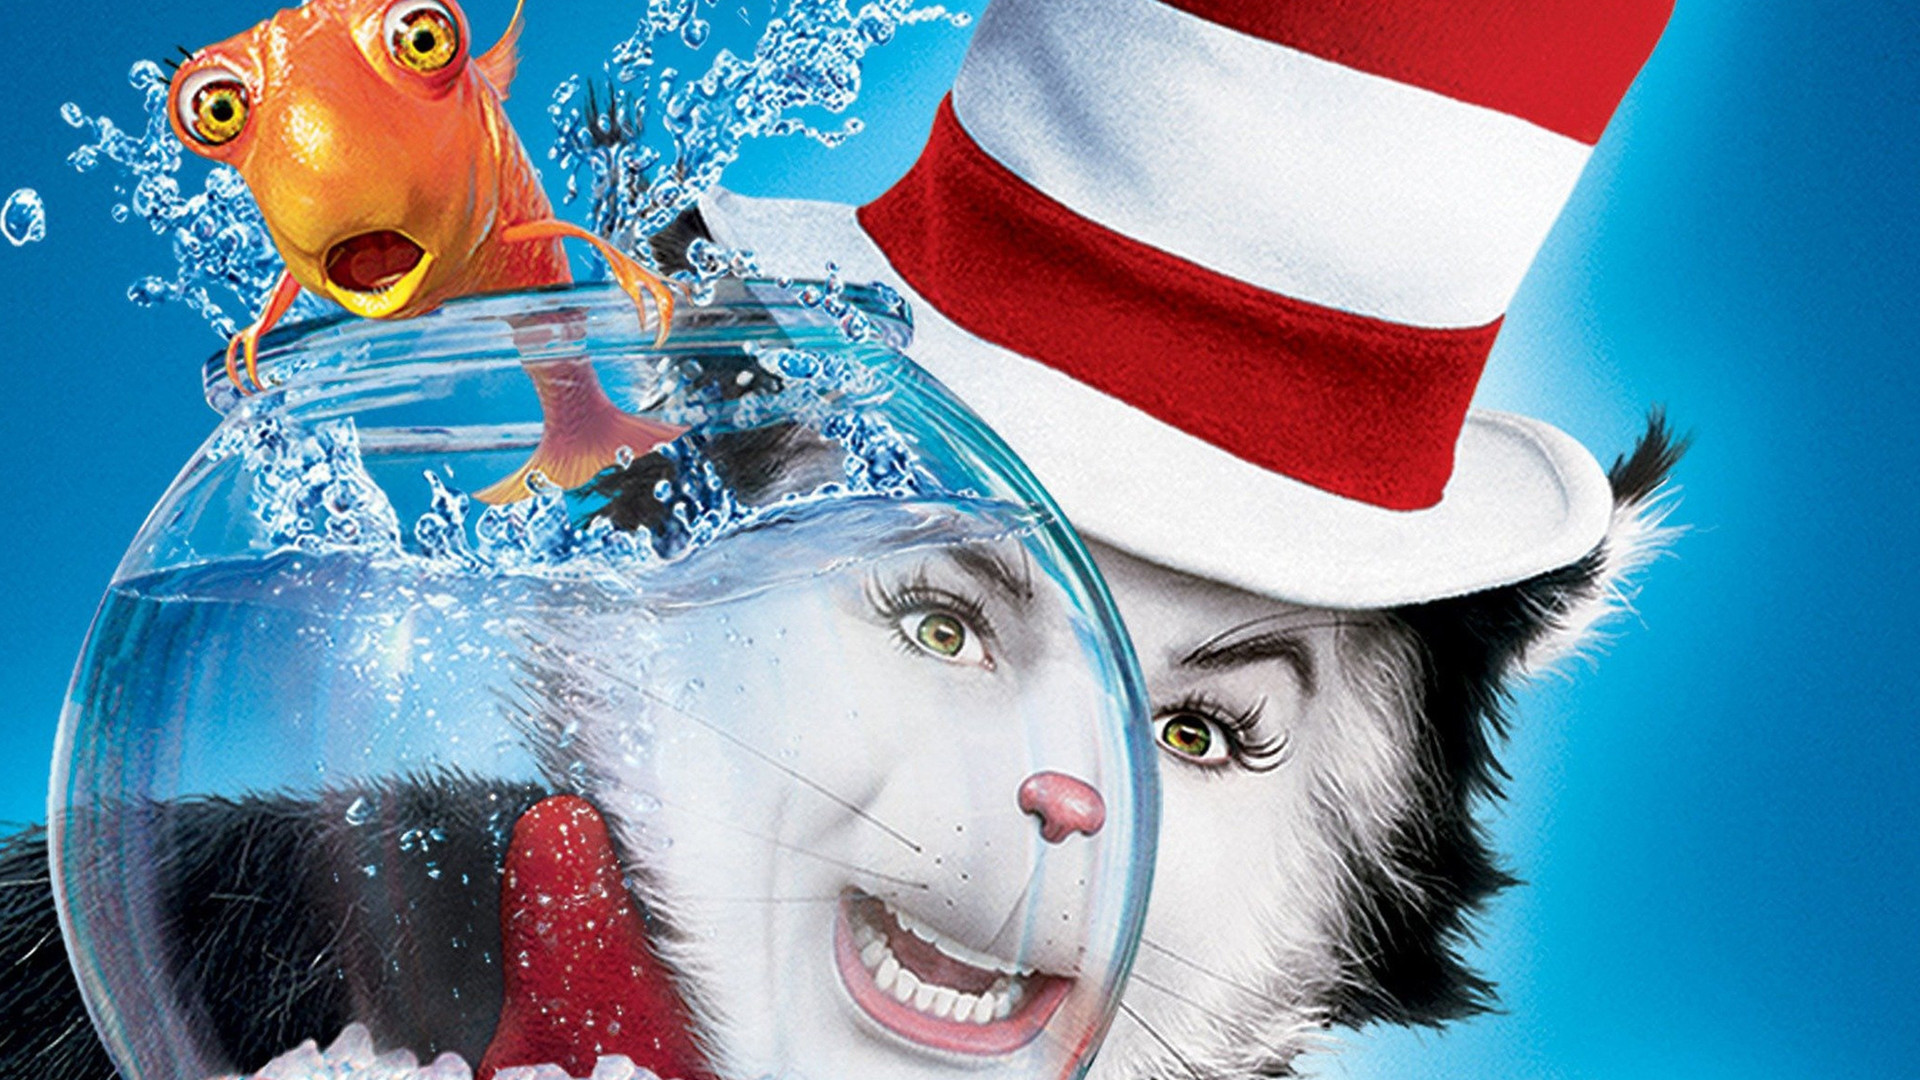 Dr. Seuss' The Cat in the Hat Details LaunchBox Games Database